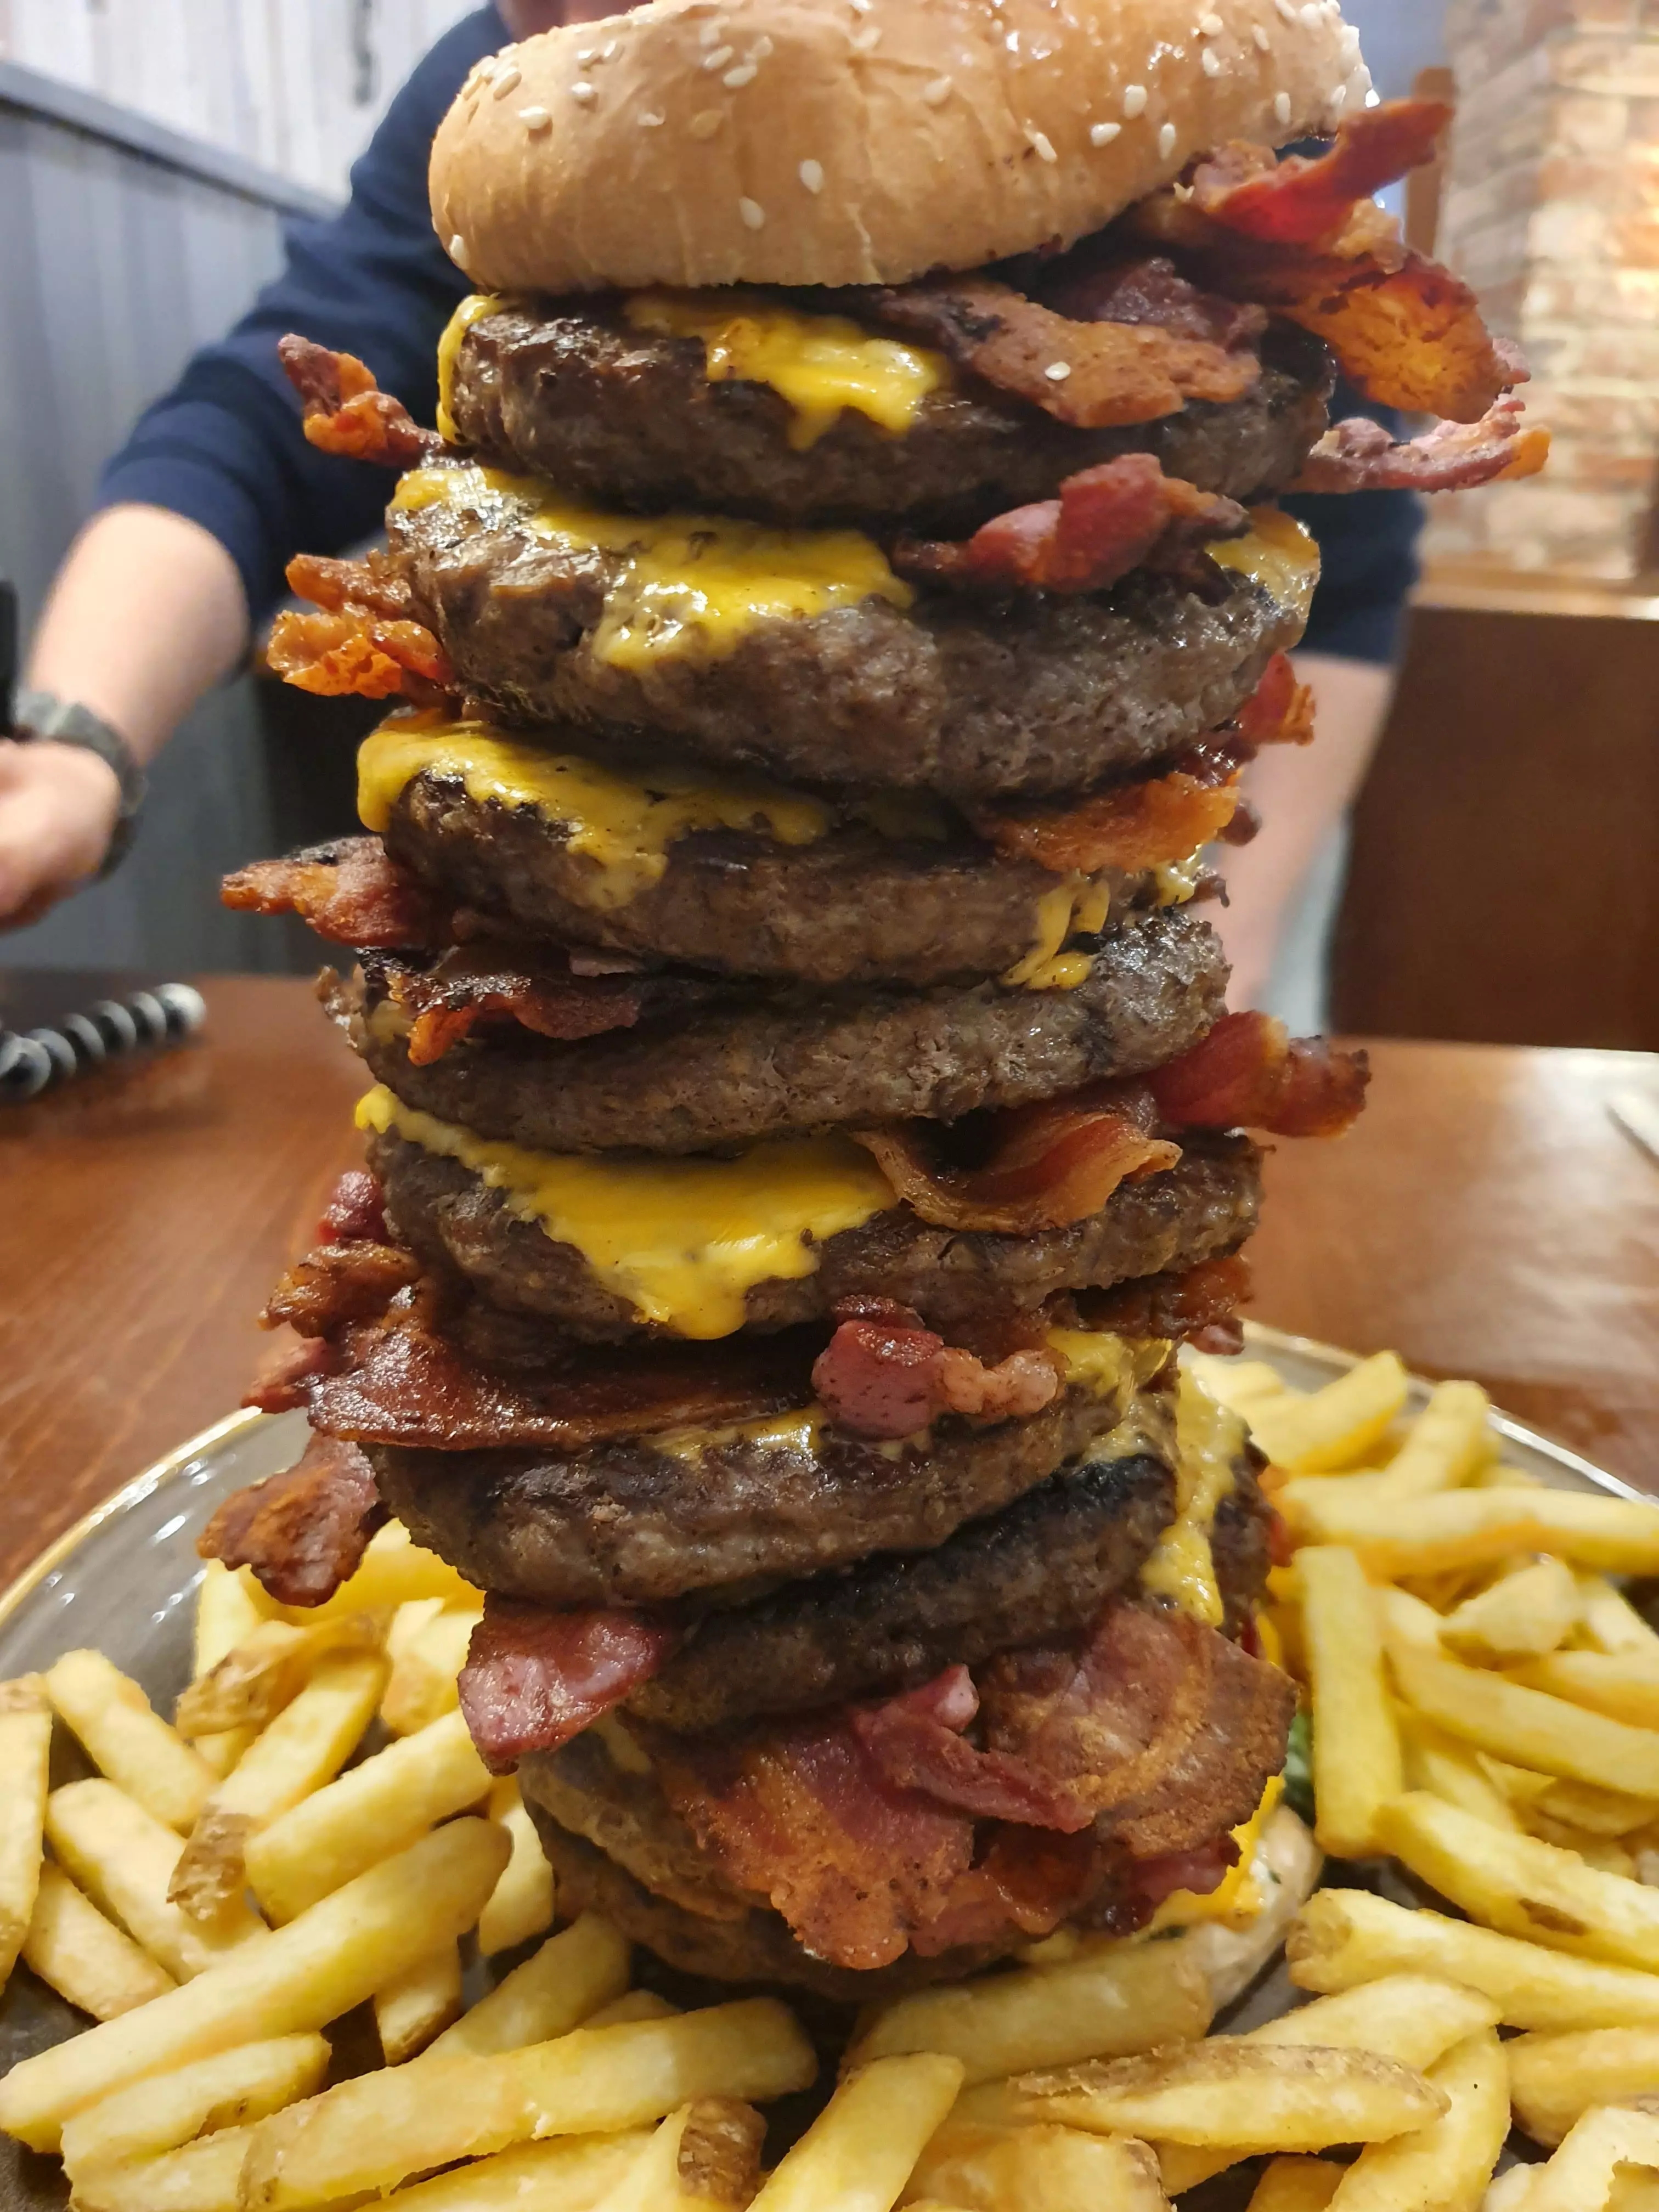 It's claimed to be the most calorific burger in the UK.